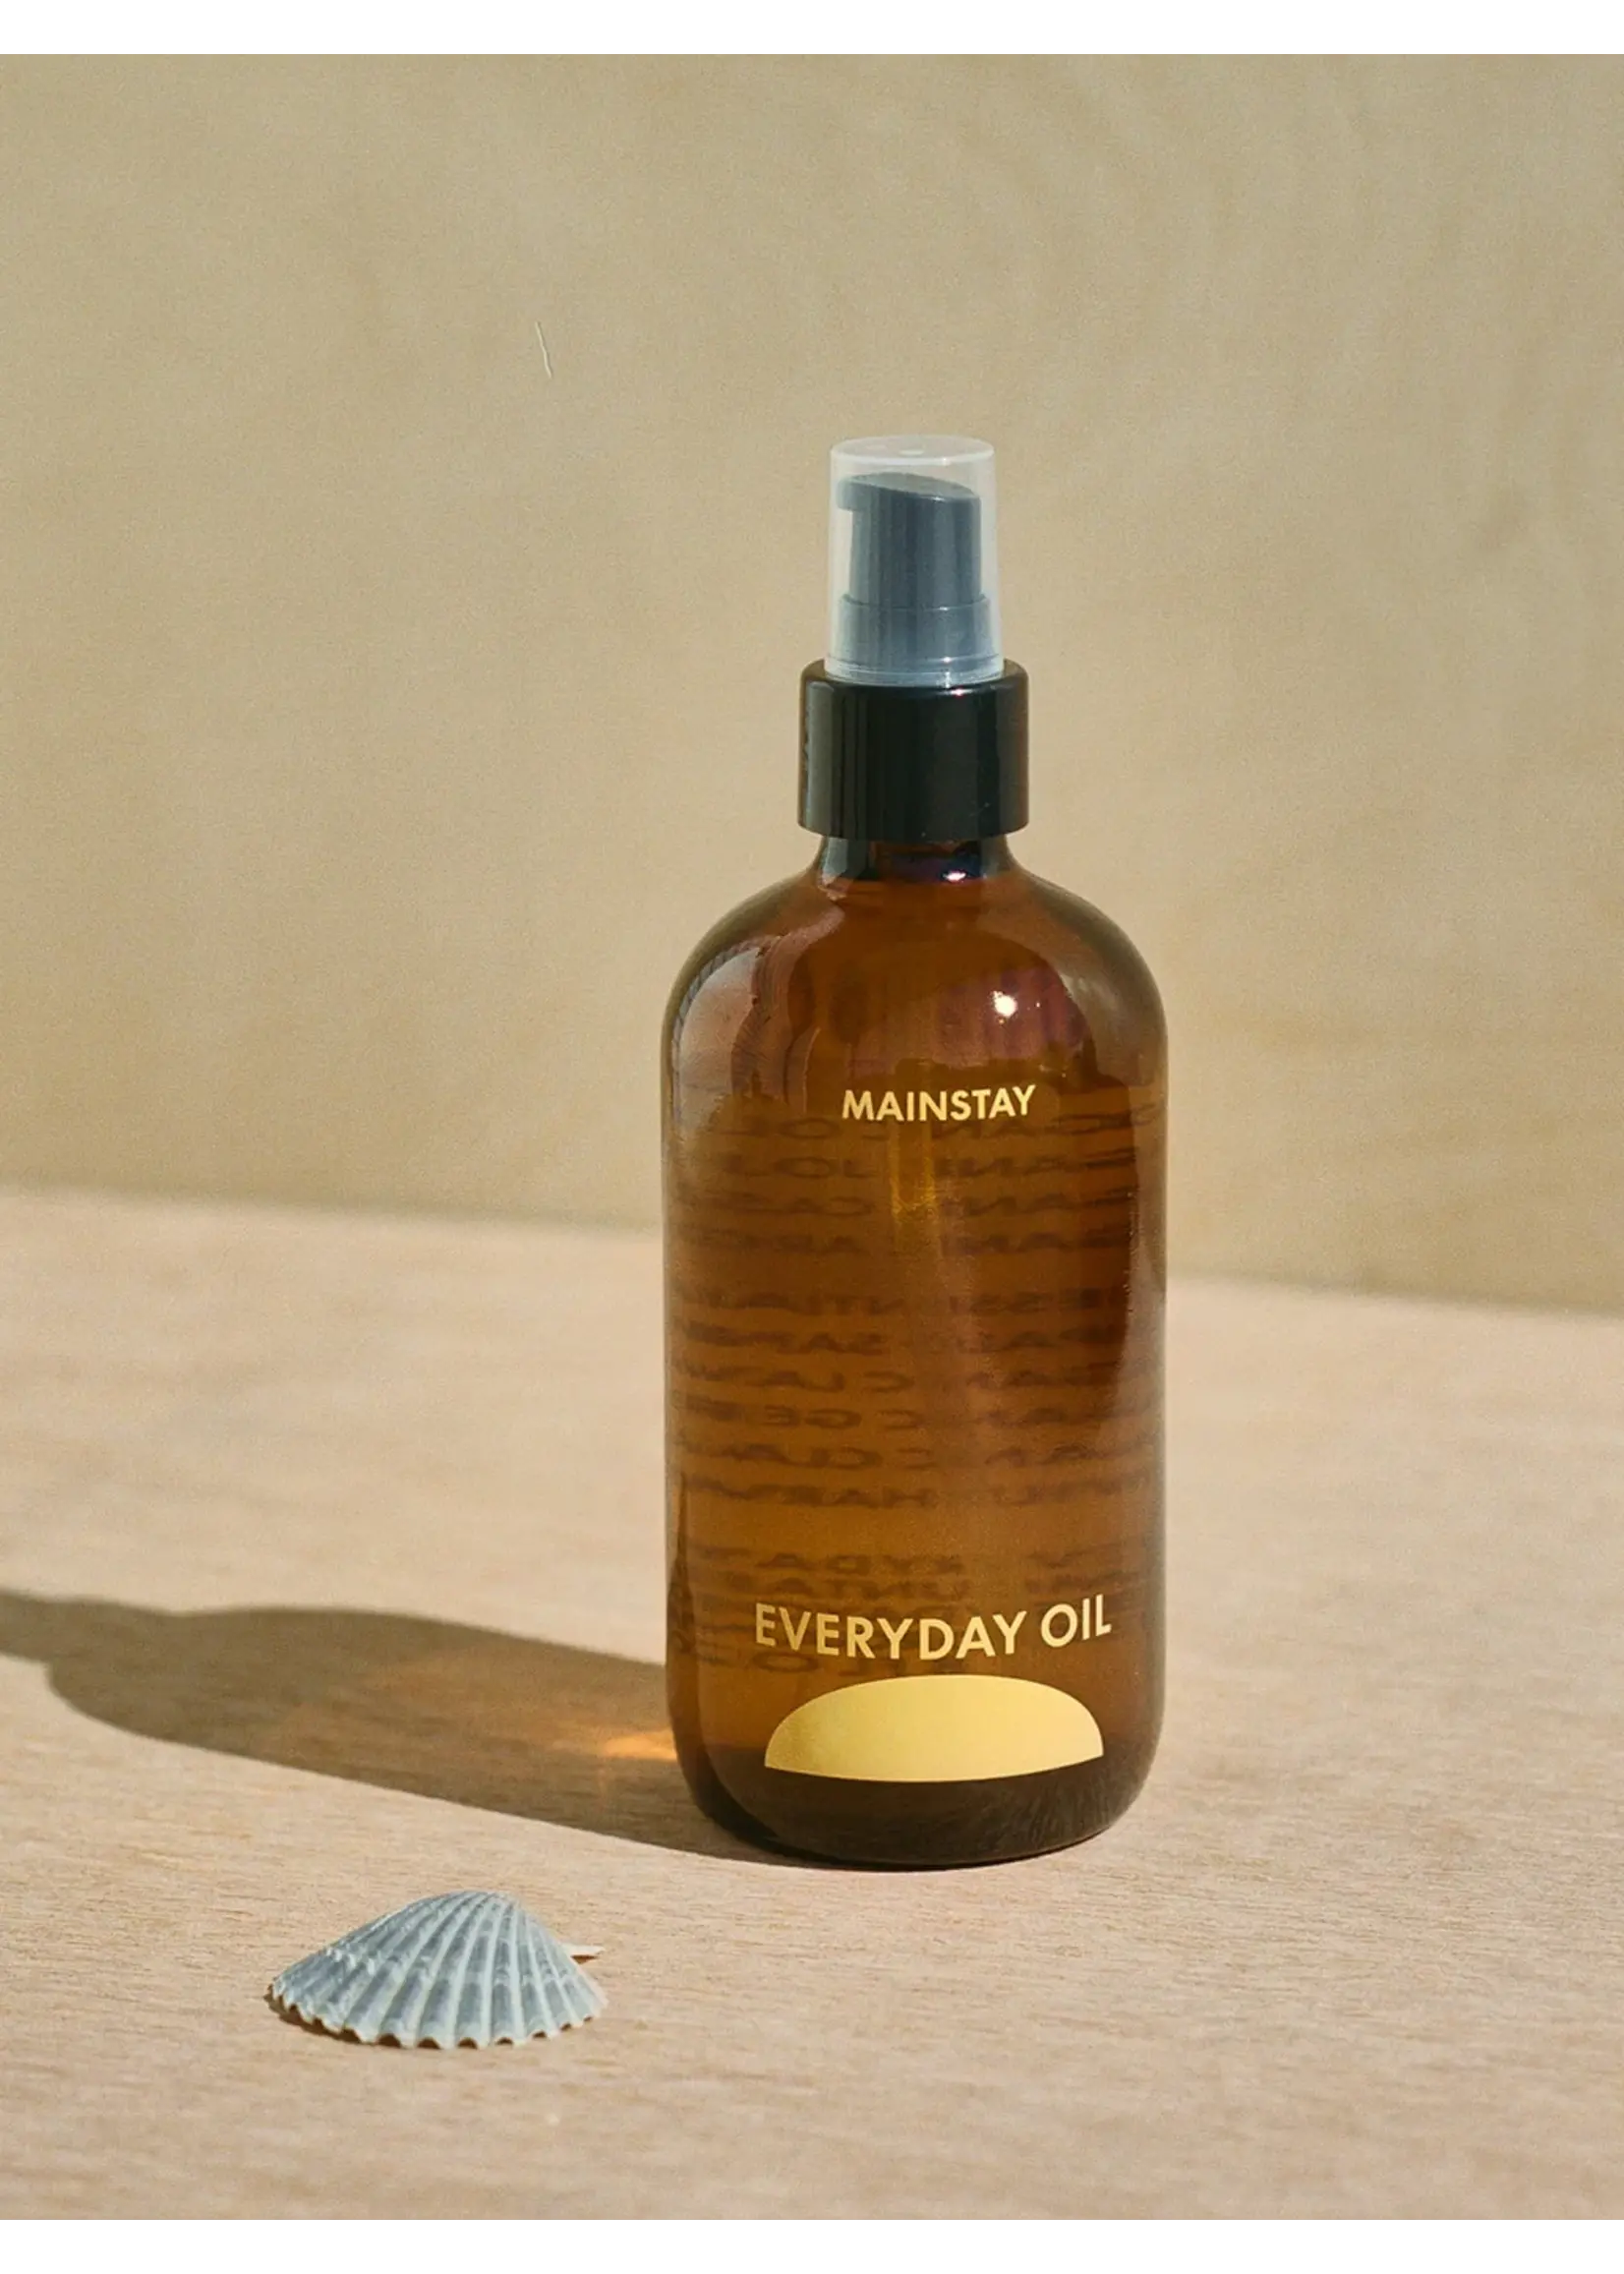 Everyday Oil Skincare oil "Mainstay" by Everyday Oil